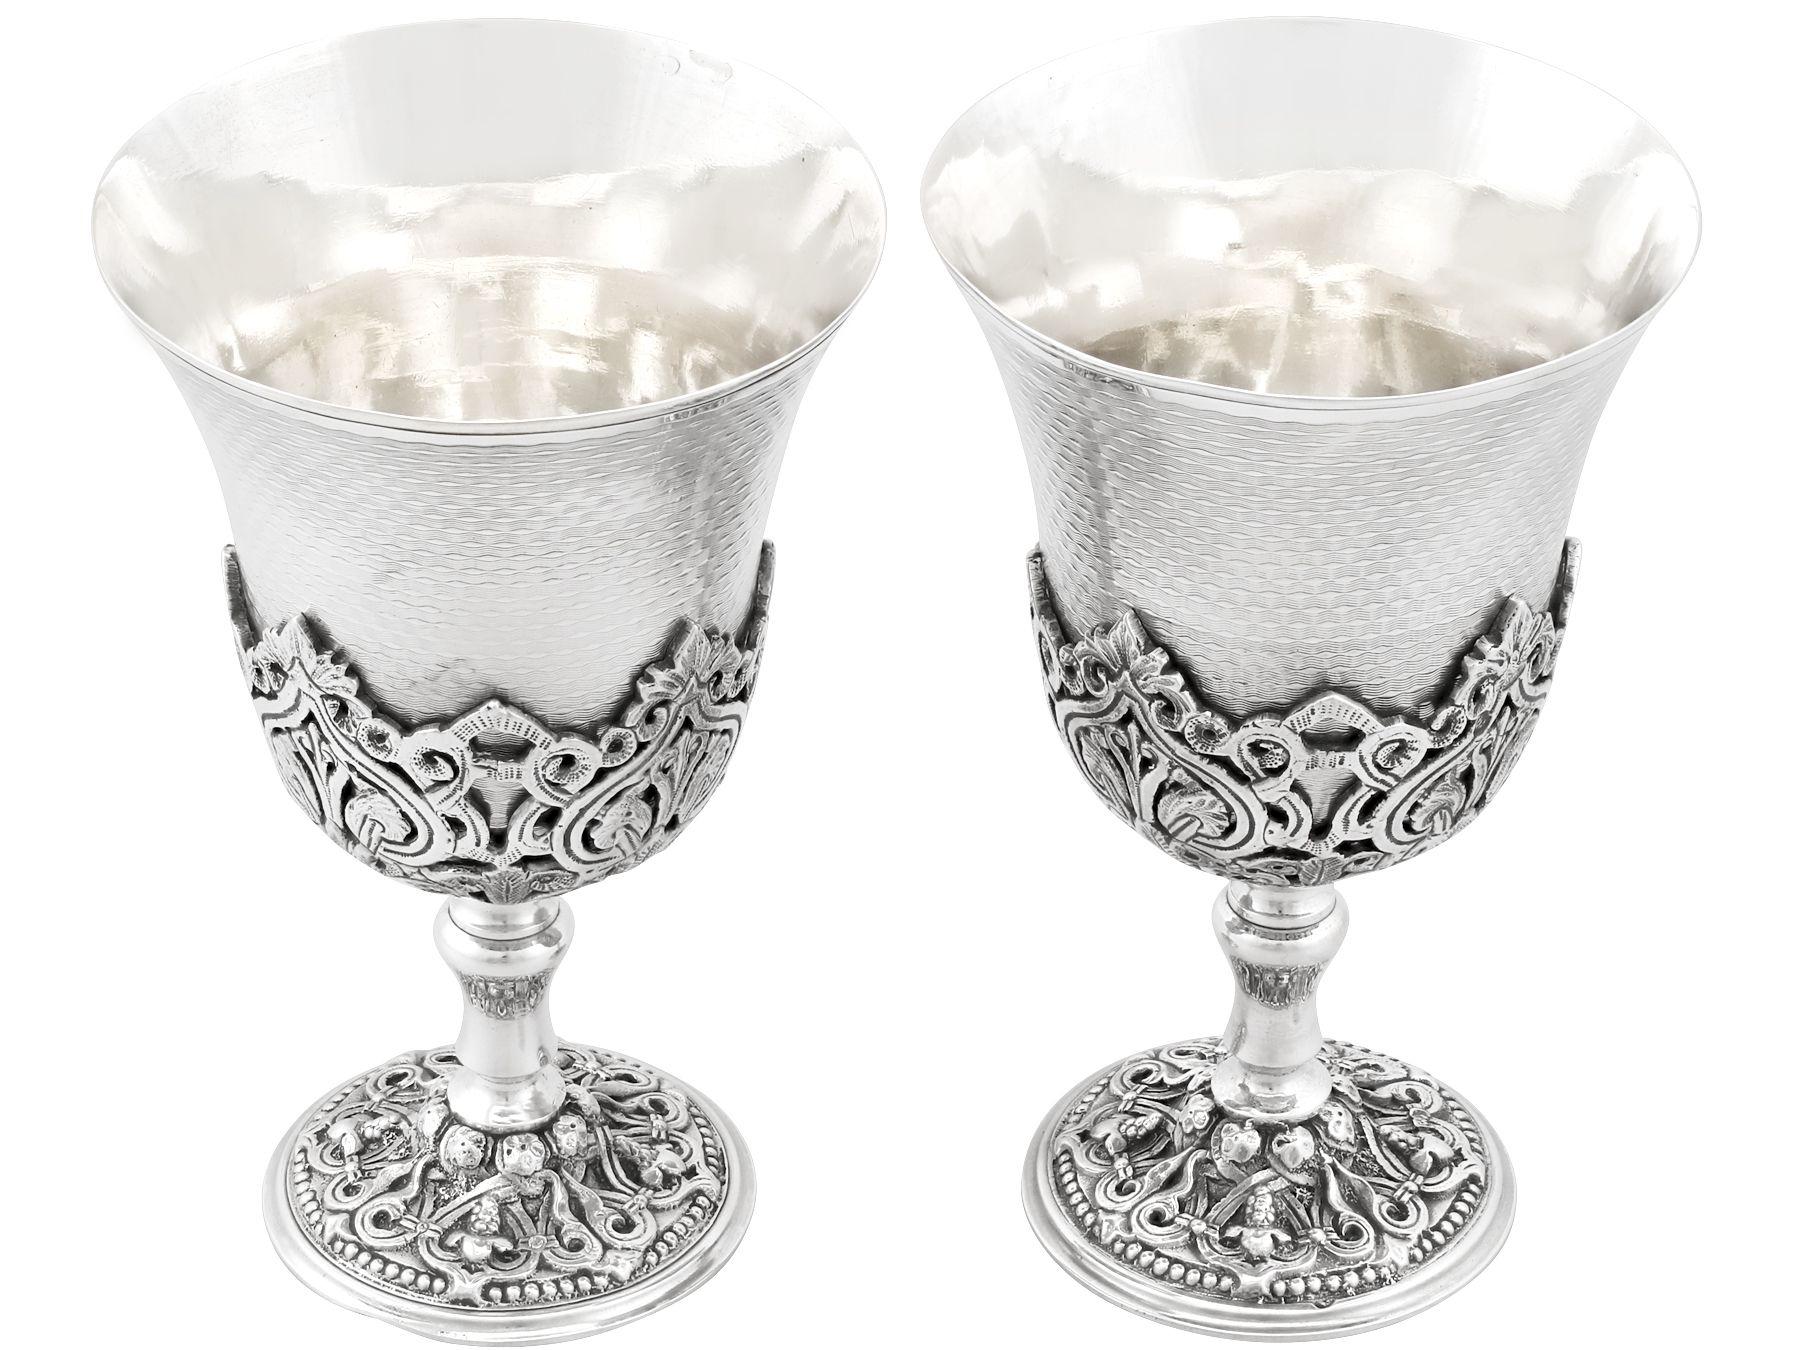 An exceptional, fine and impressive pair of antique Turkish silver goblets; an addition to our range of wine and drink related silverware

These exceptional antique Turkish silver goblets have a circular bell shaped form onto a waisted pedestal,